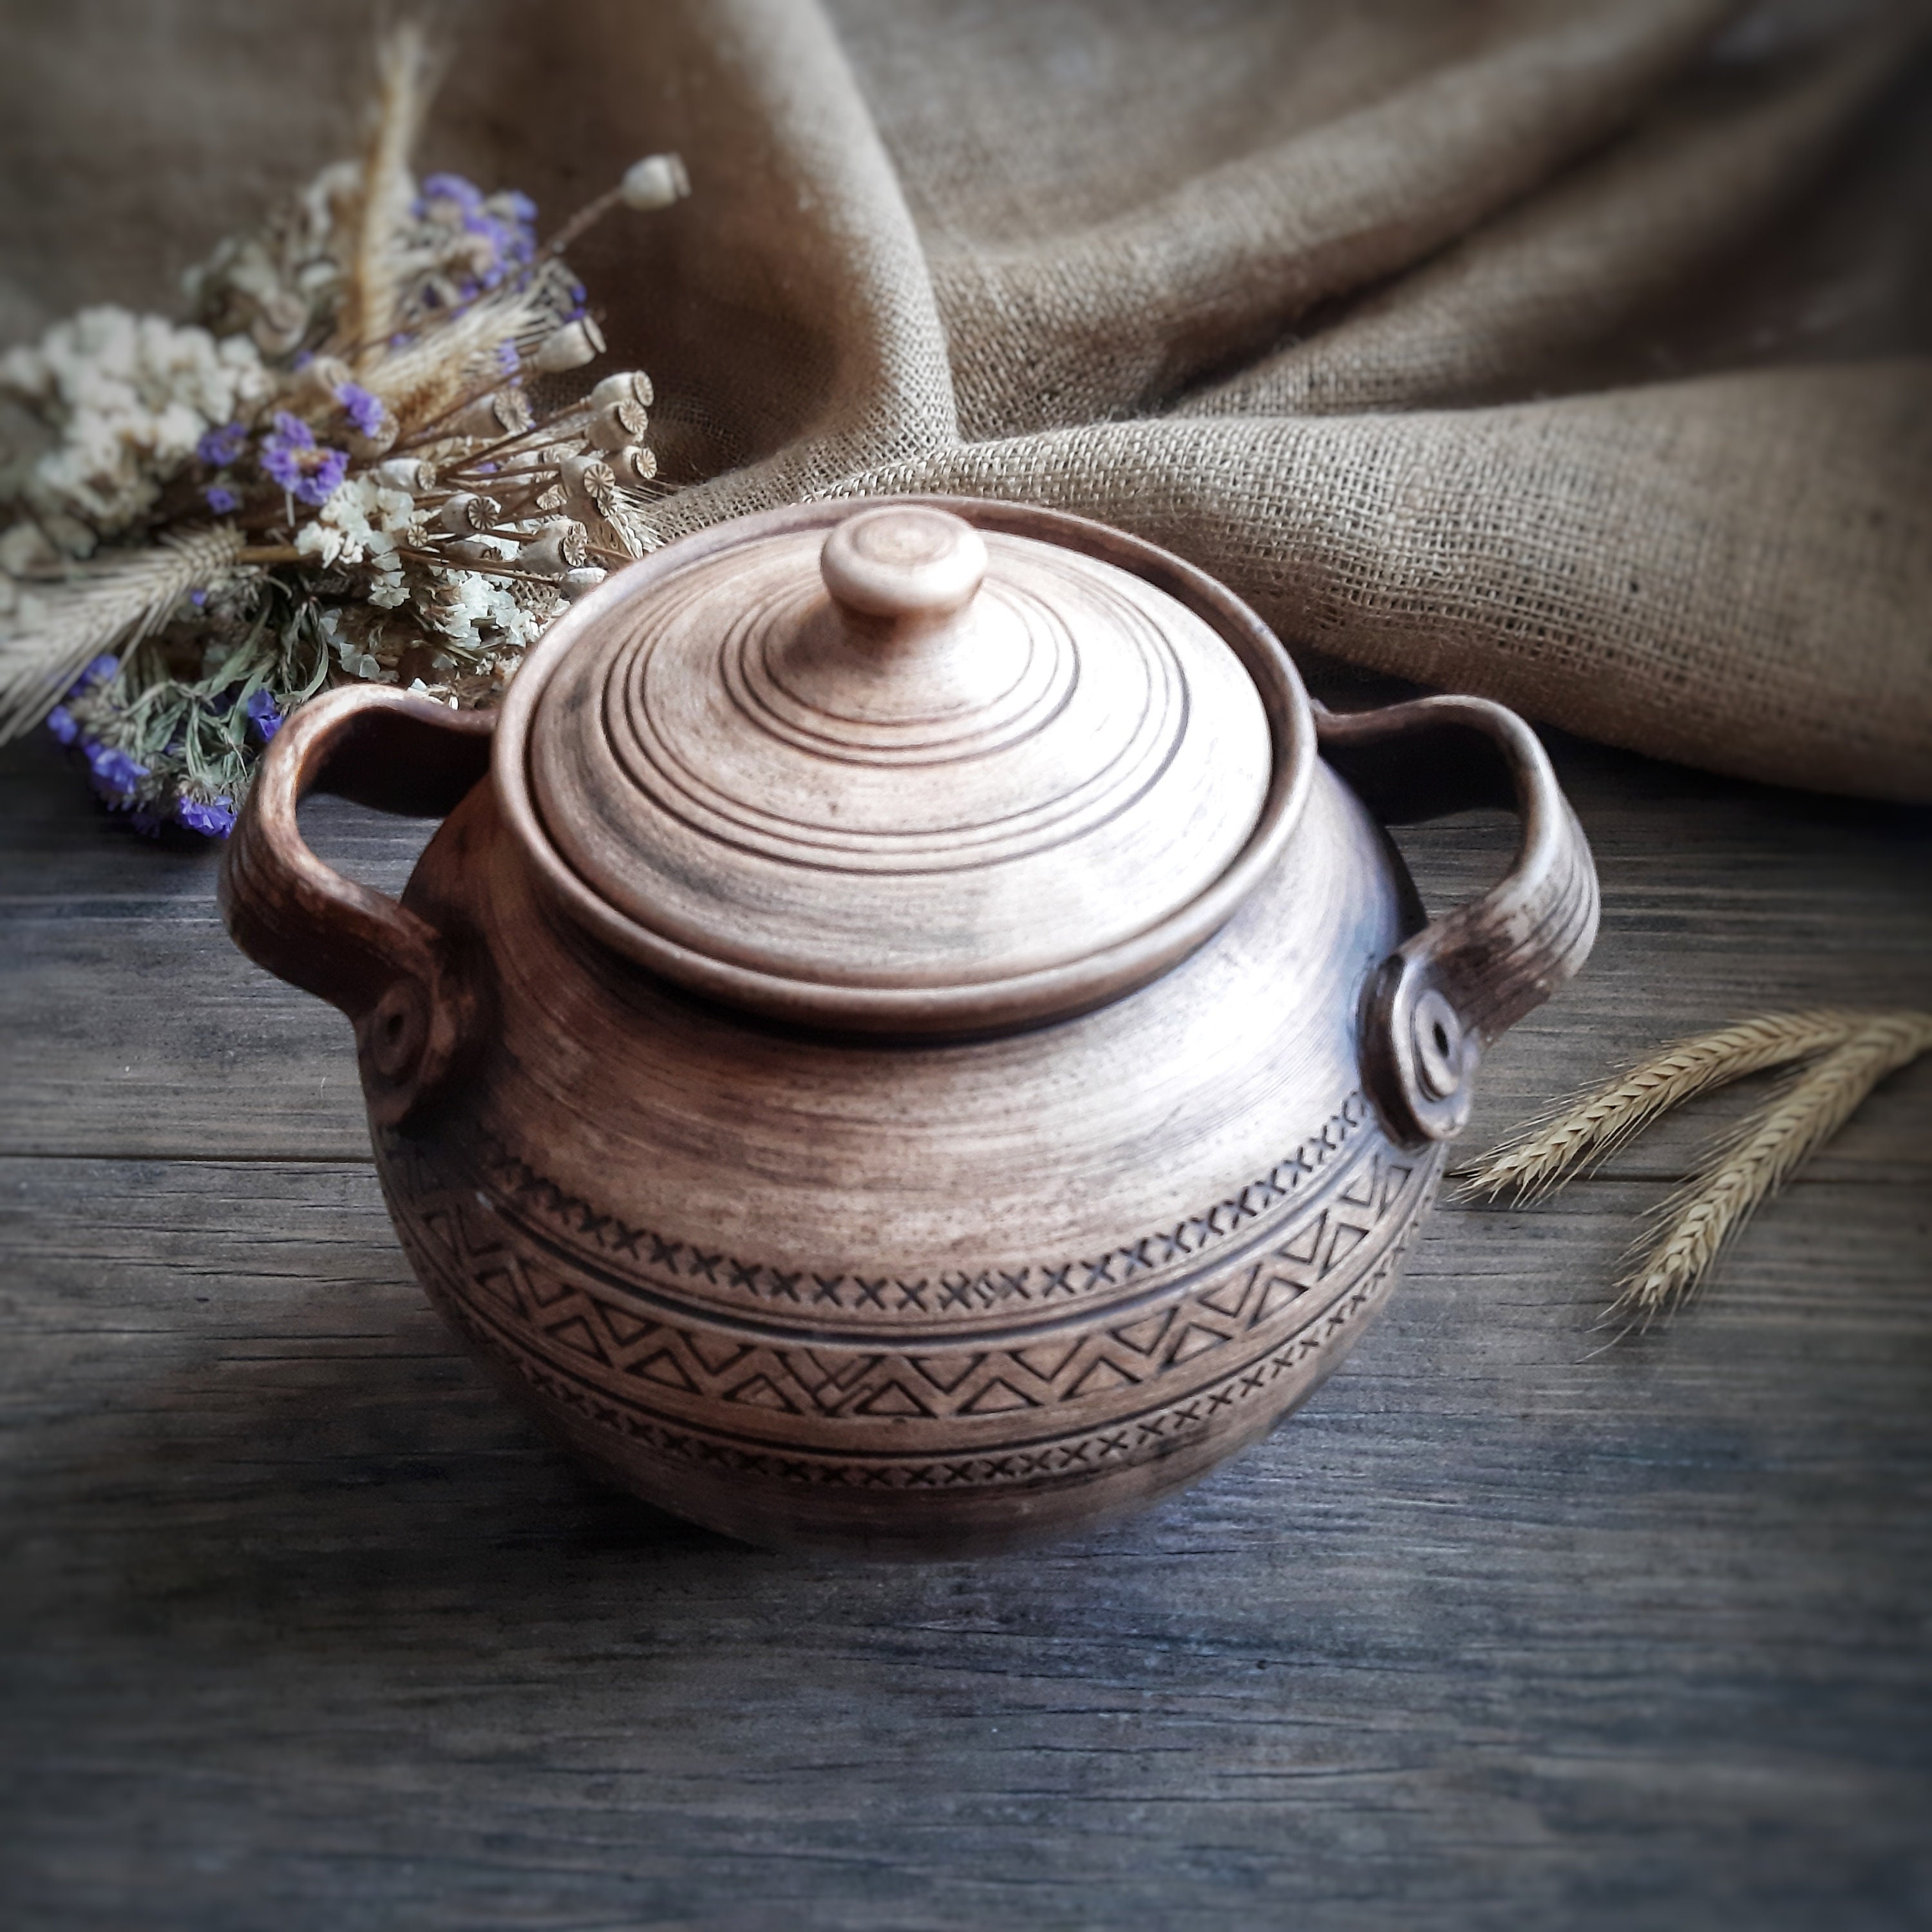 Buy Online small size Clay Pot With Lid, UlaMart